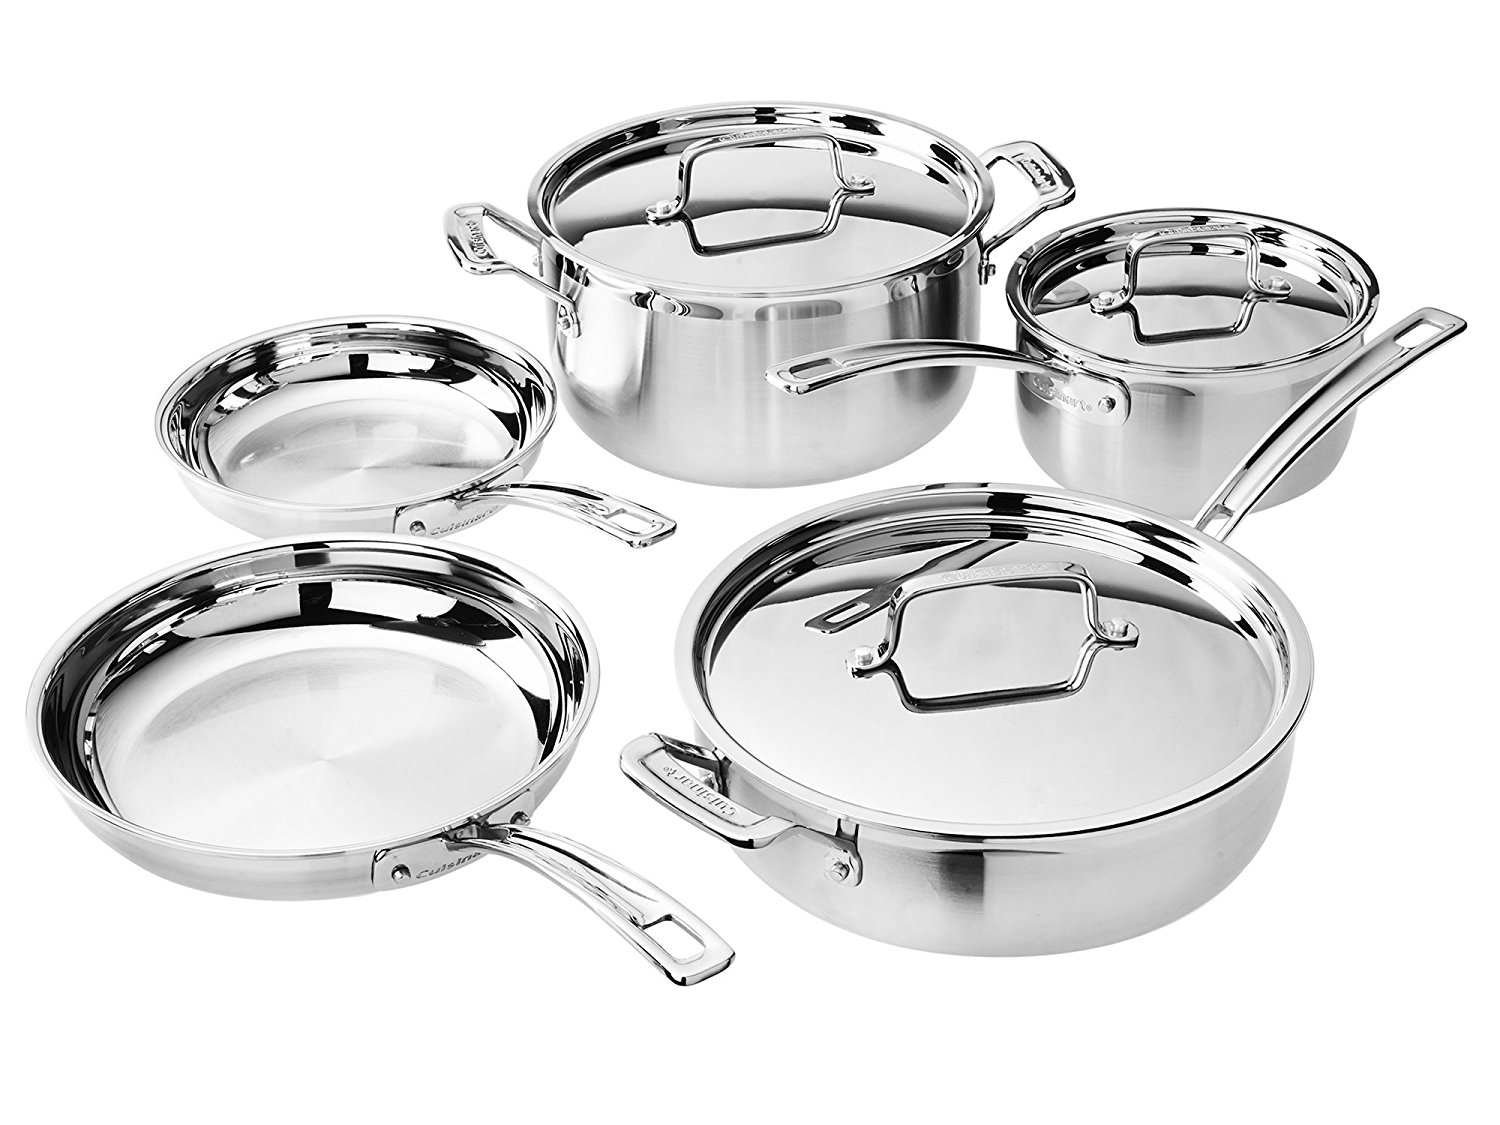 Save on Cuisinart MultiClad Pro 8-Piece Cookware Set – Just $139.99!